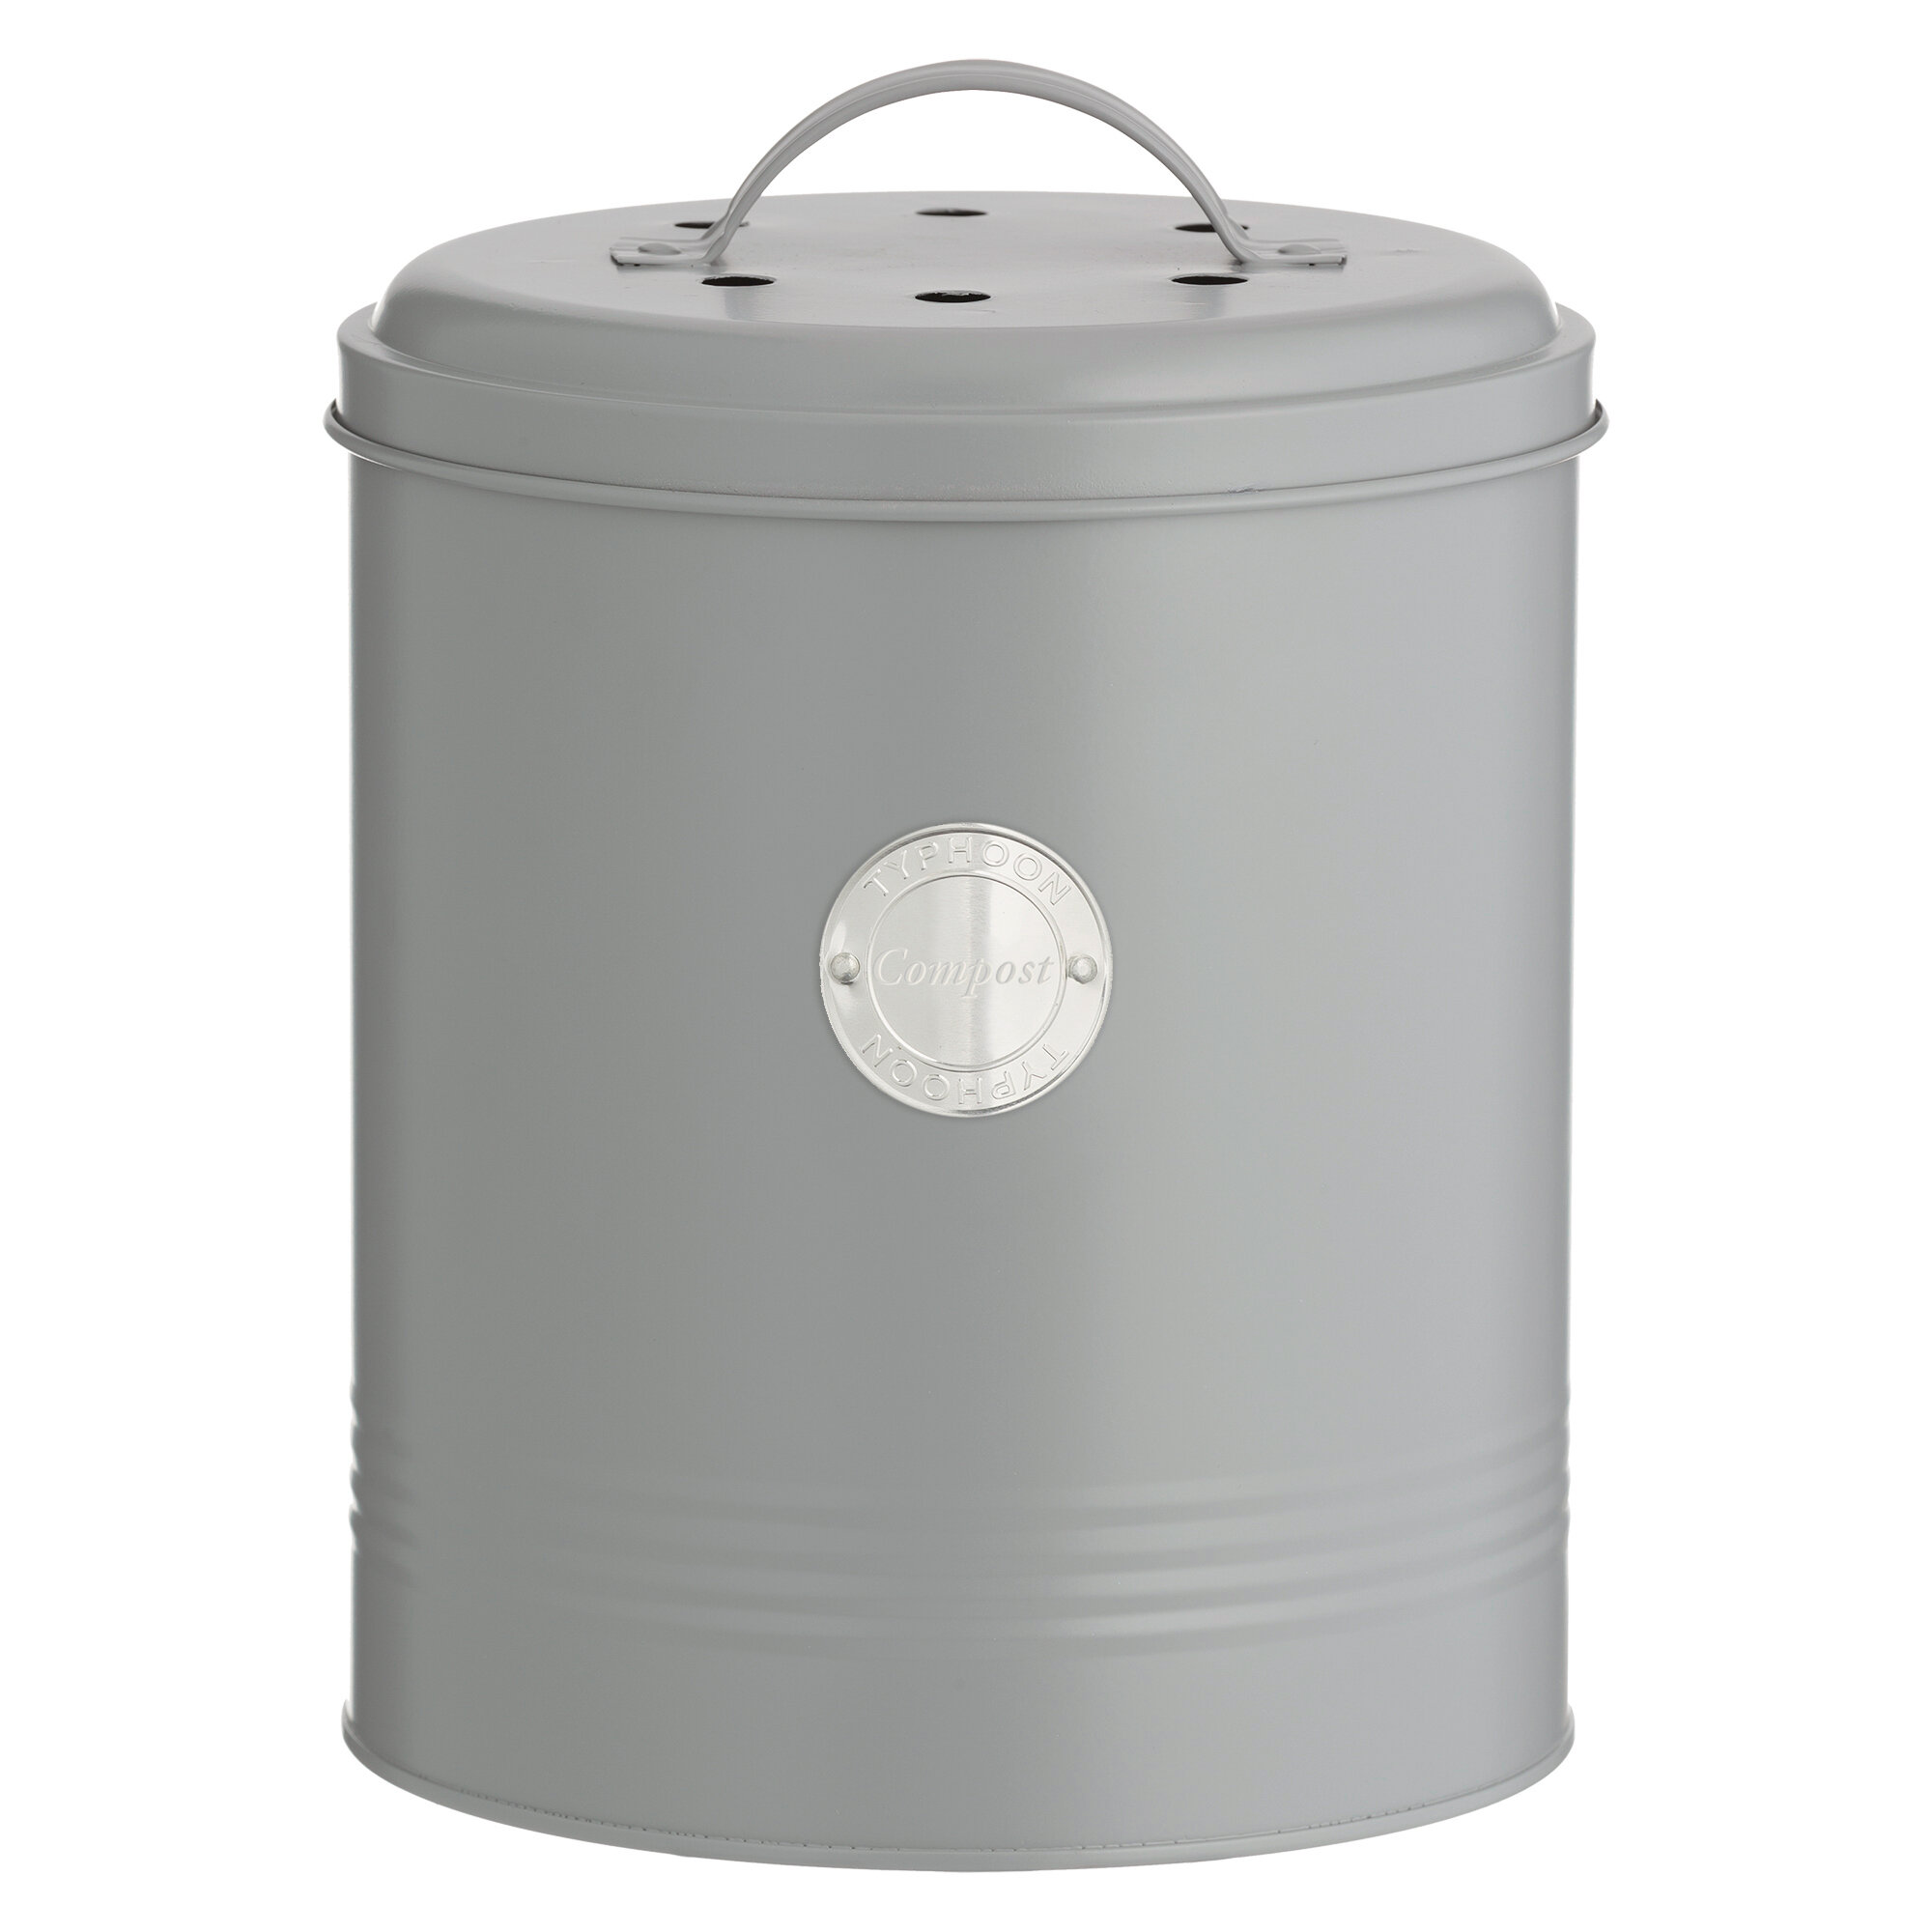 itouchless Oval Stainless Steel 1.6 Gallon Countertop Compost Bin & Reviews